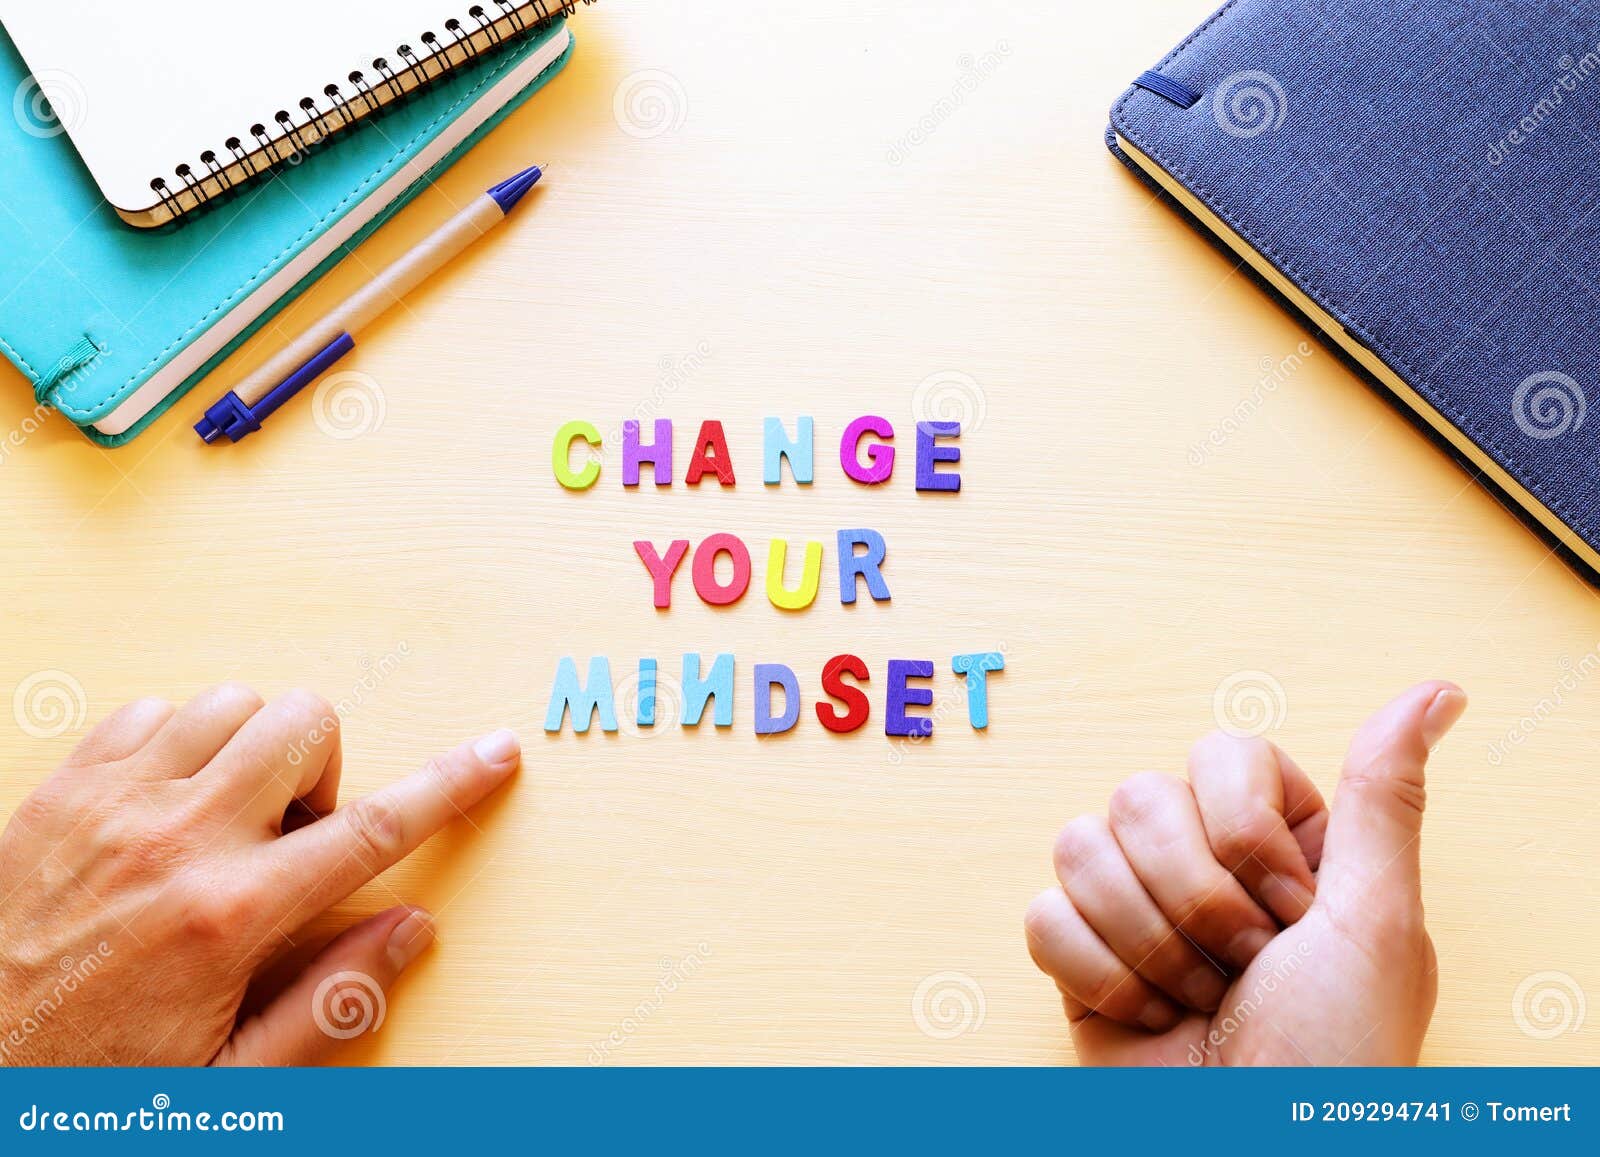 concept image with change your mindset text. top view of office table